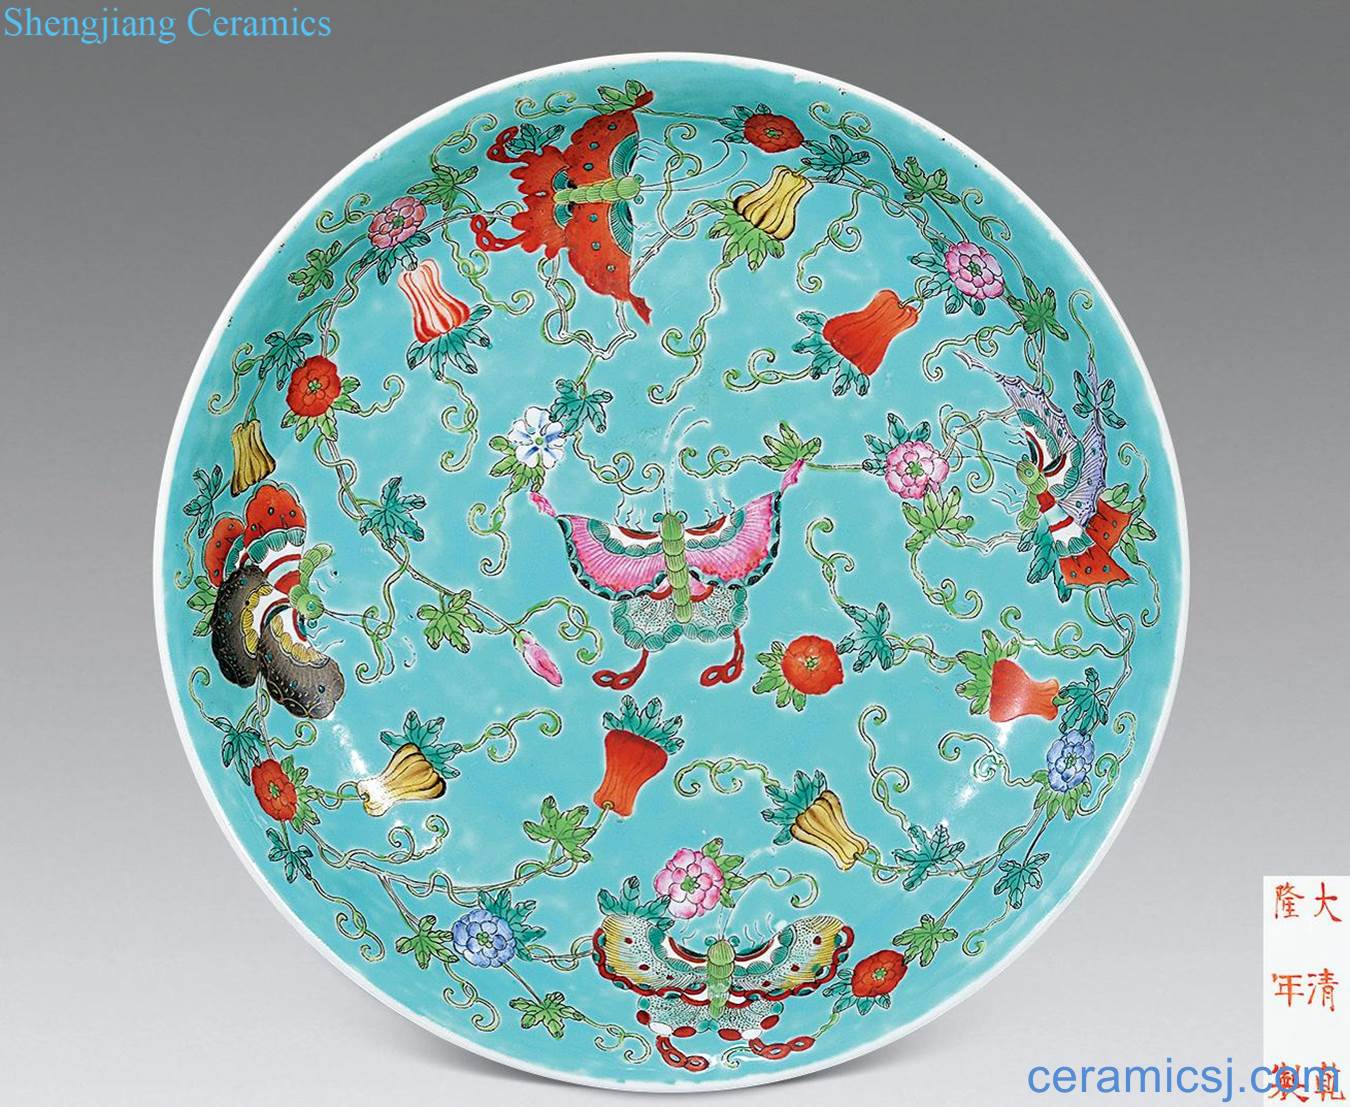 Pastel reign of qing emperor guangxu melon butterfly plate